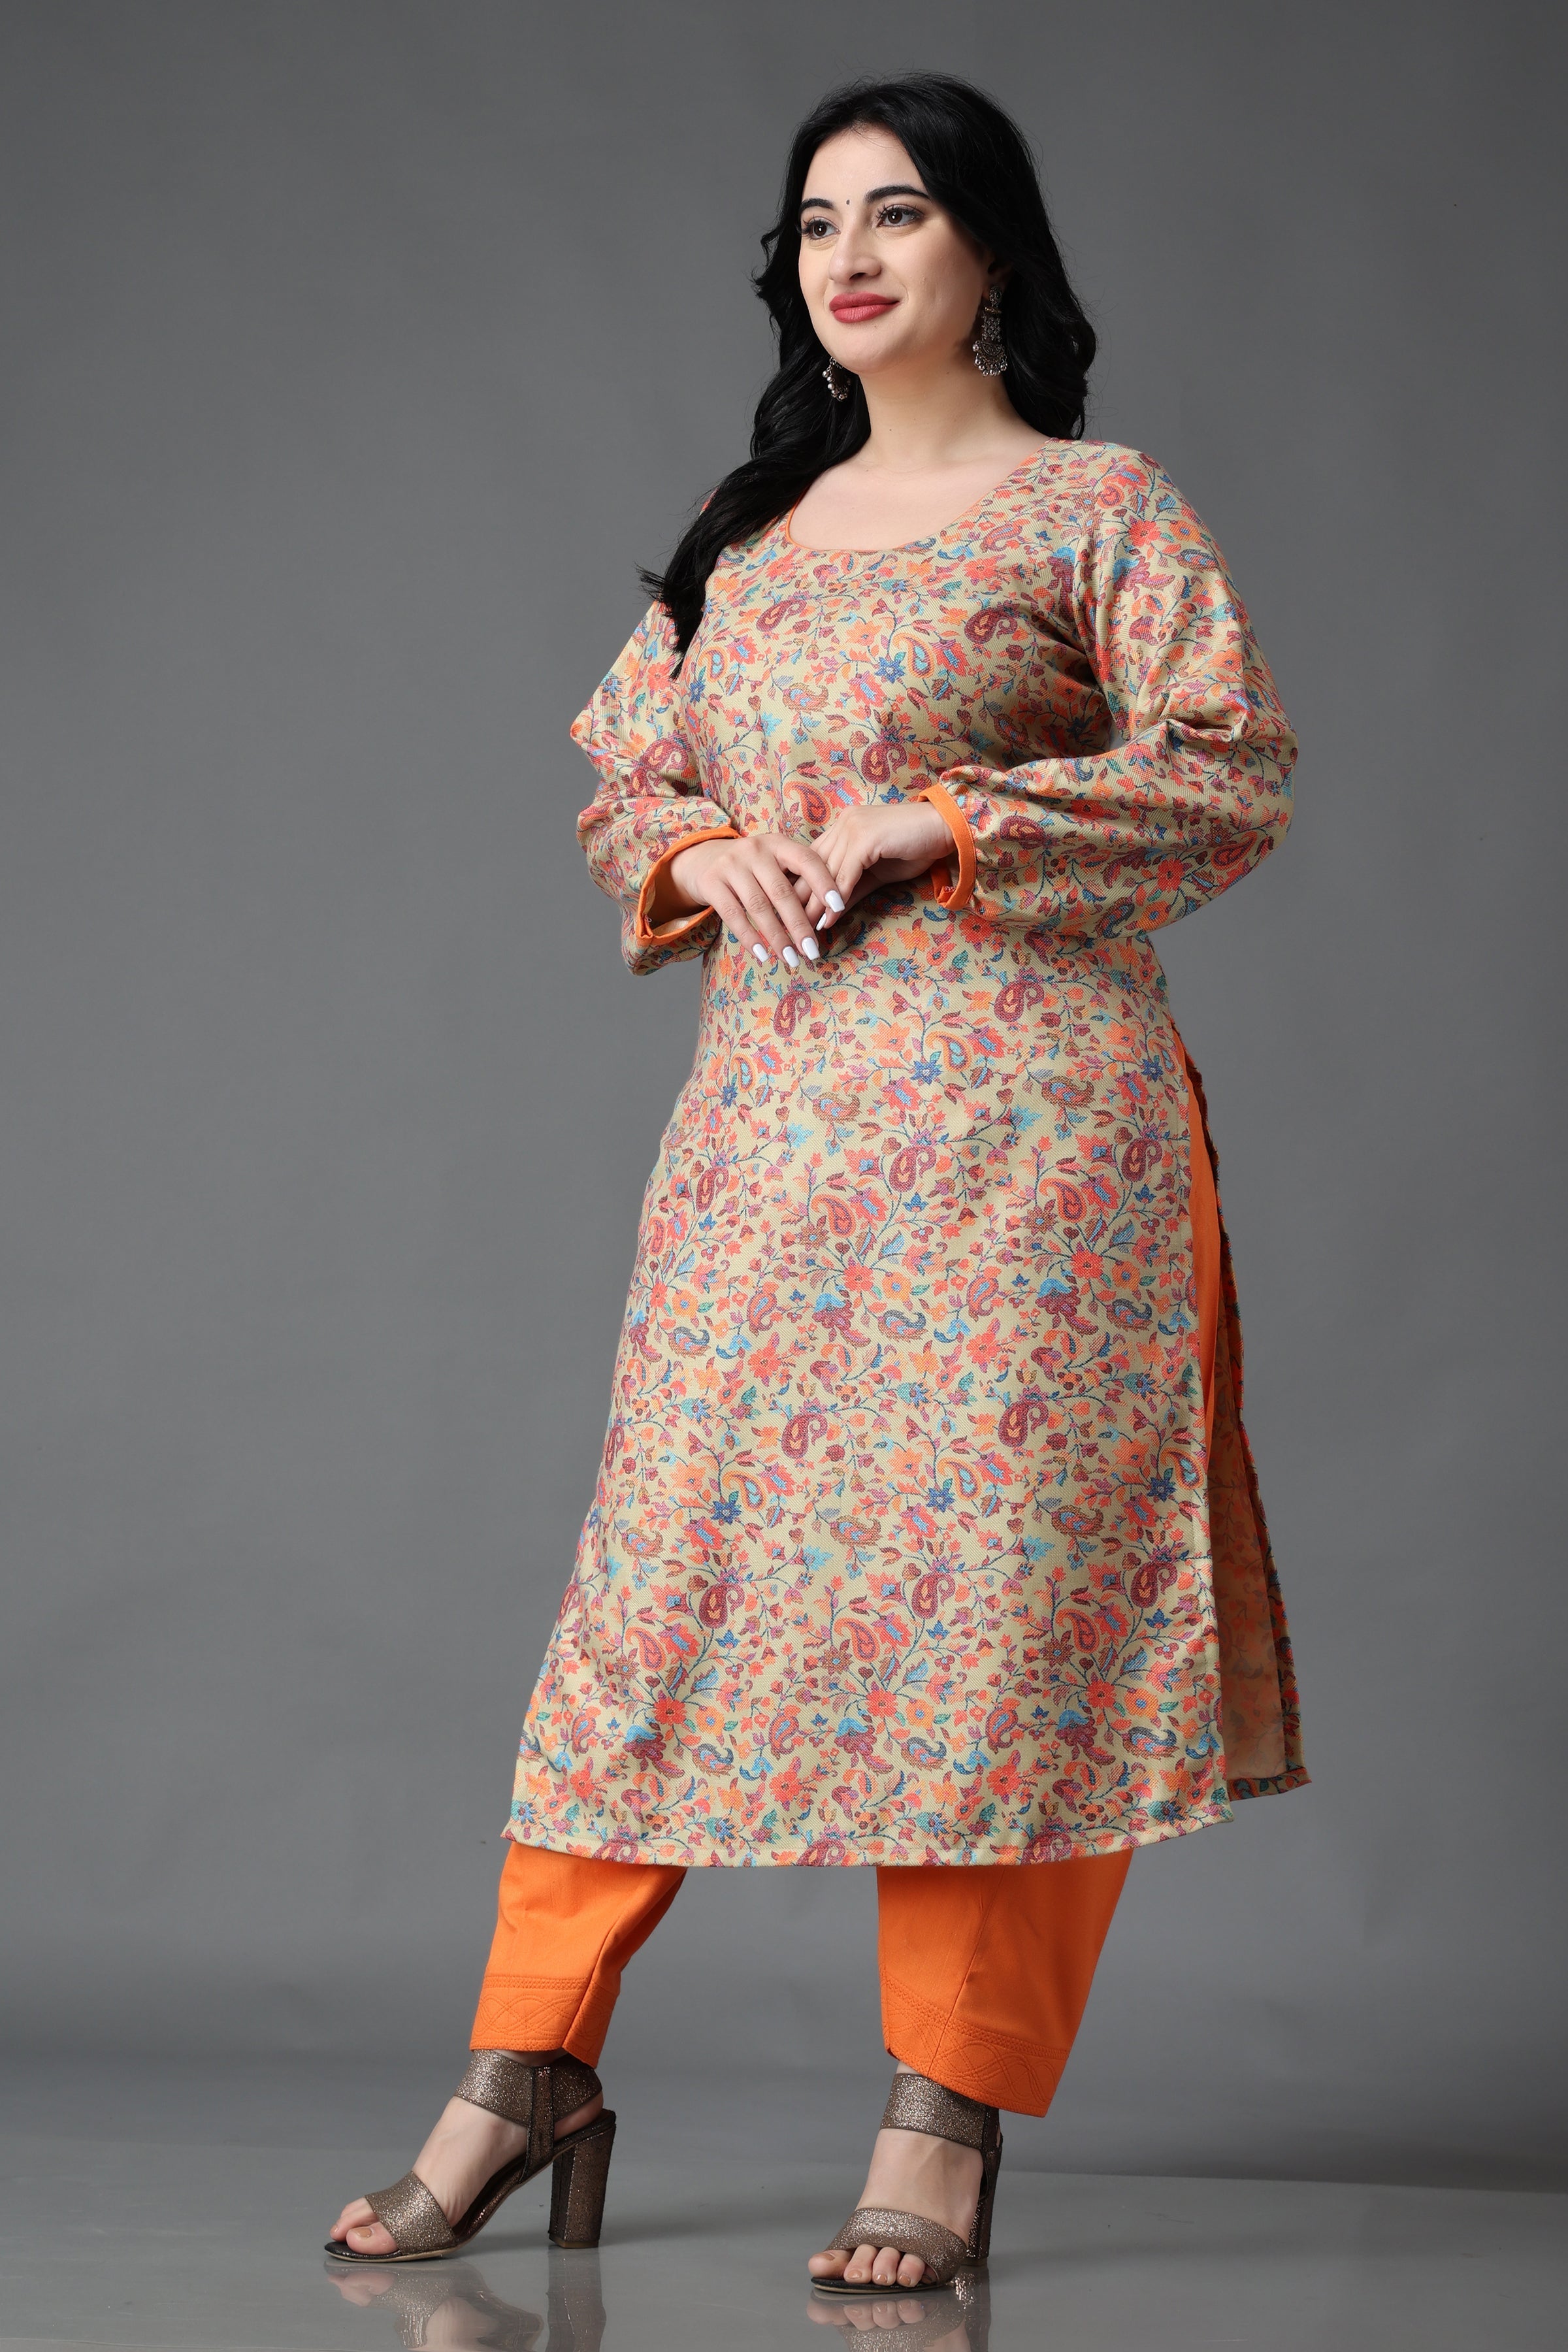 Enjoy an Ethnic Winter With Kurtis and Trouser Pants for Ladies With Kurti  - The Kosha Journal